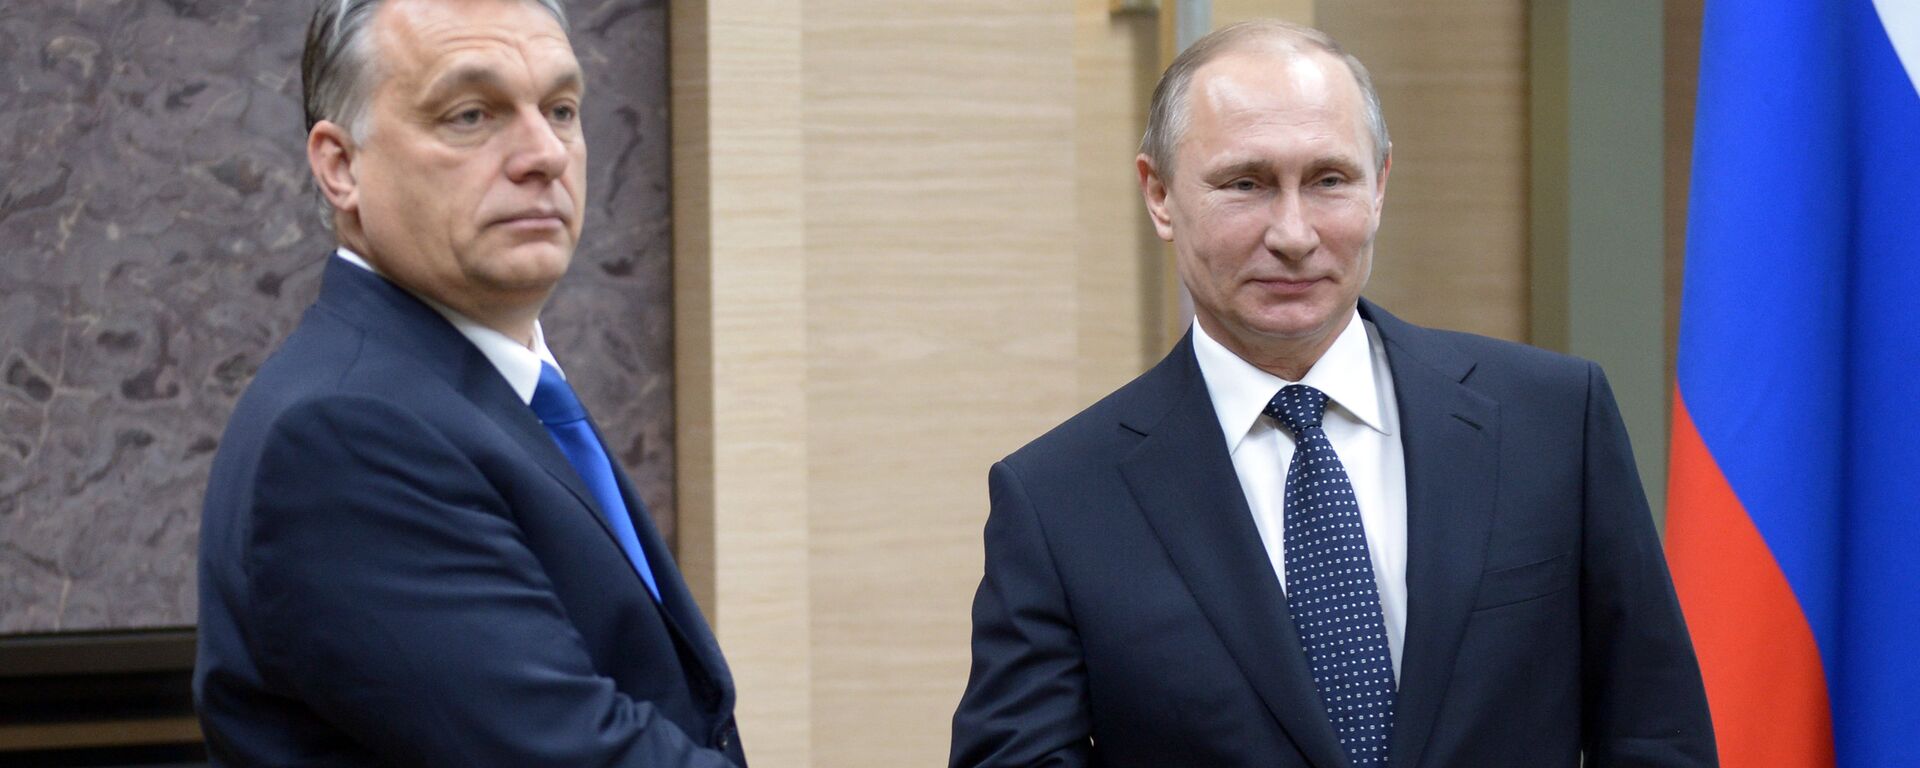 Russian President Vladimir Putin, right, and Hungarian Prime Minister Viktor Orban during a meeting at the Novo-Ogaryovo residence in the Moscow Region - Sputnik International, 1920, 17.10.2023